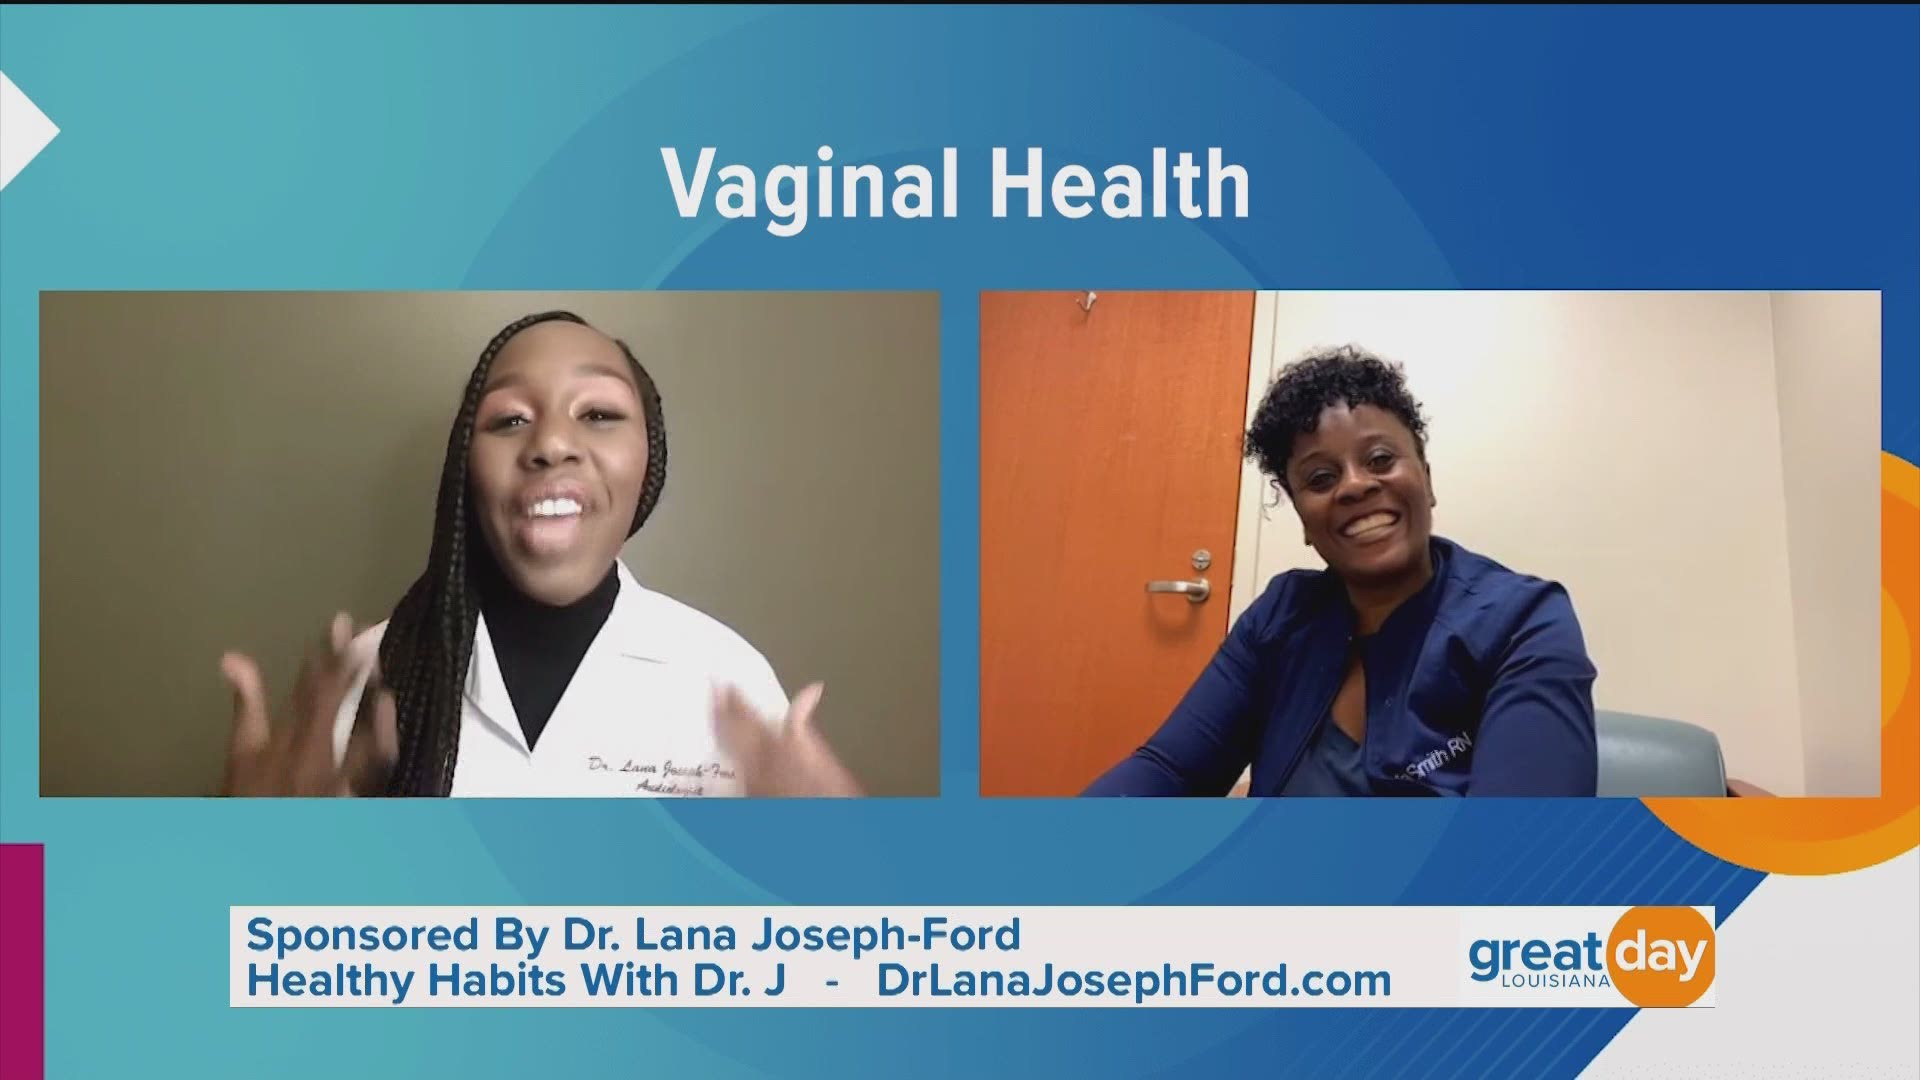 Today's Healthy Habits is all about vaginal health. Dr. J speaks with Melinda Williams on proper care for all women. For more, visit drlanajosephford.com